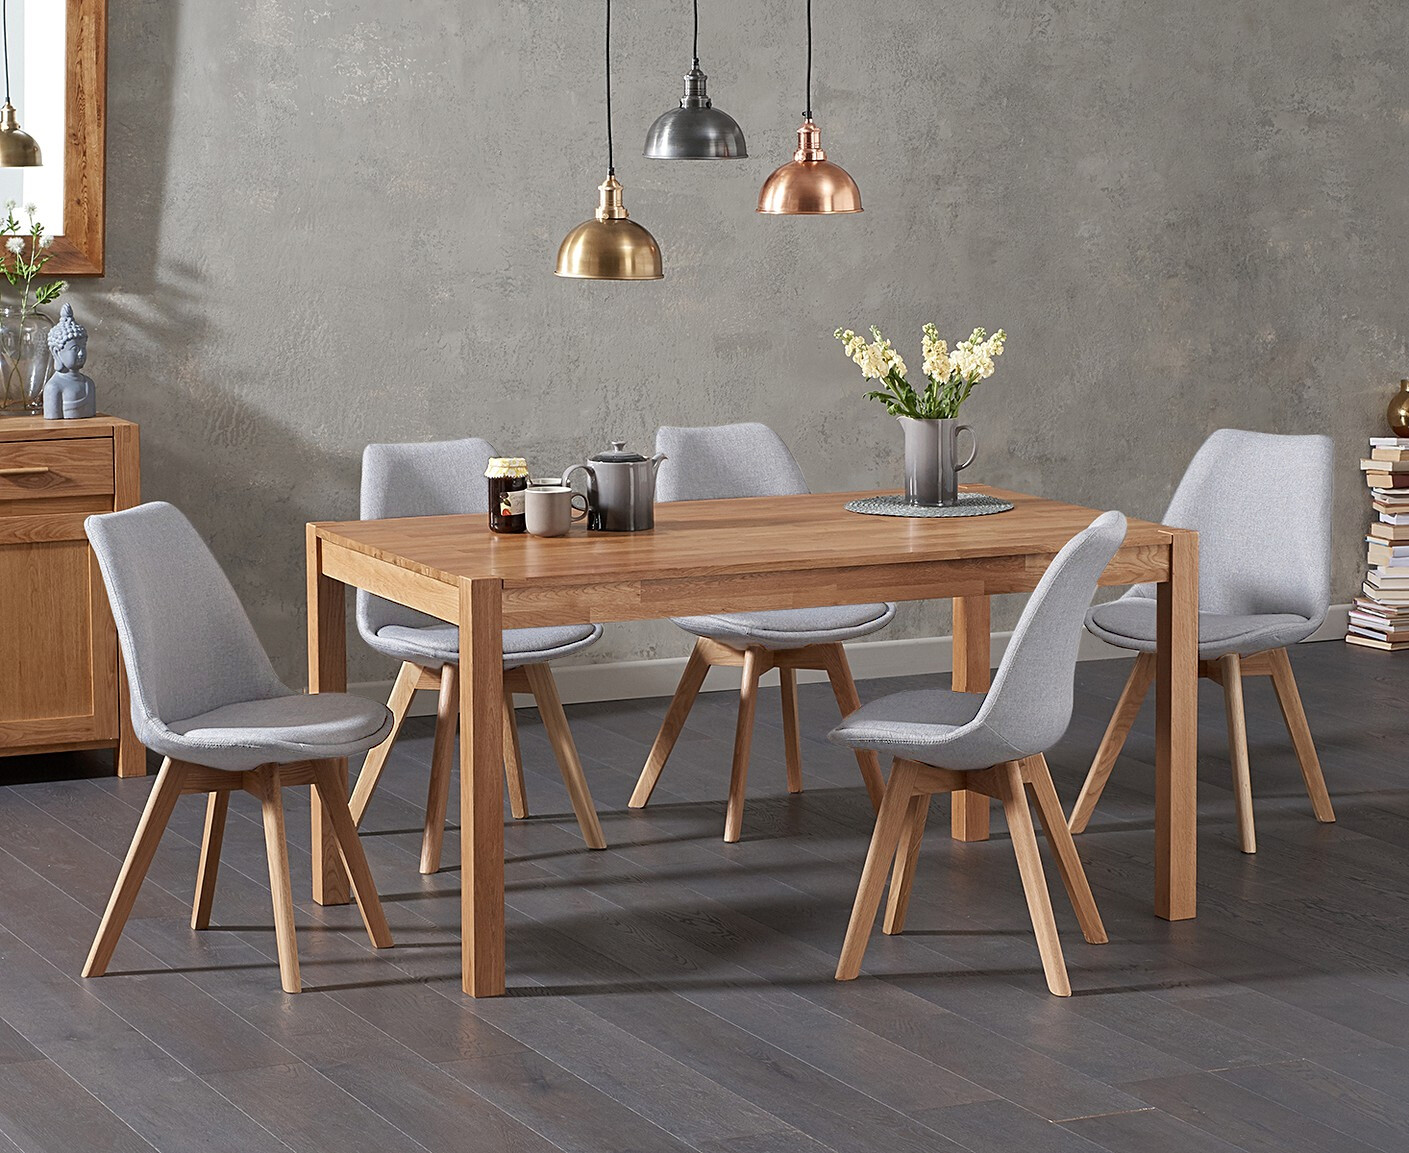 Photo 2 of Oxford solid oak 150cm dining table with 8 dark grey orson chairs